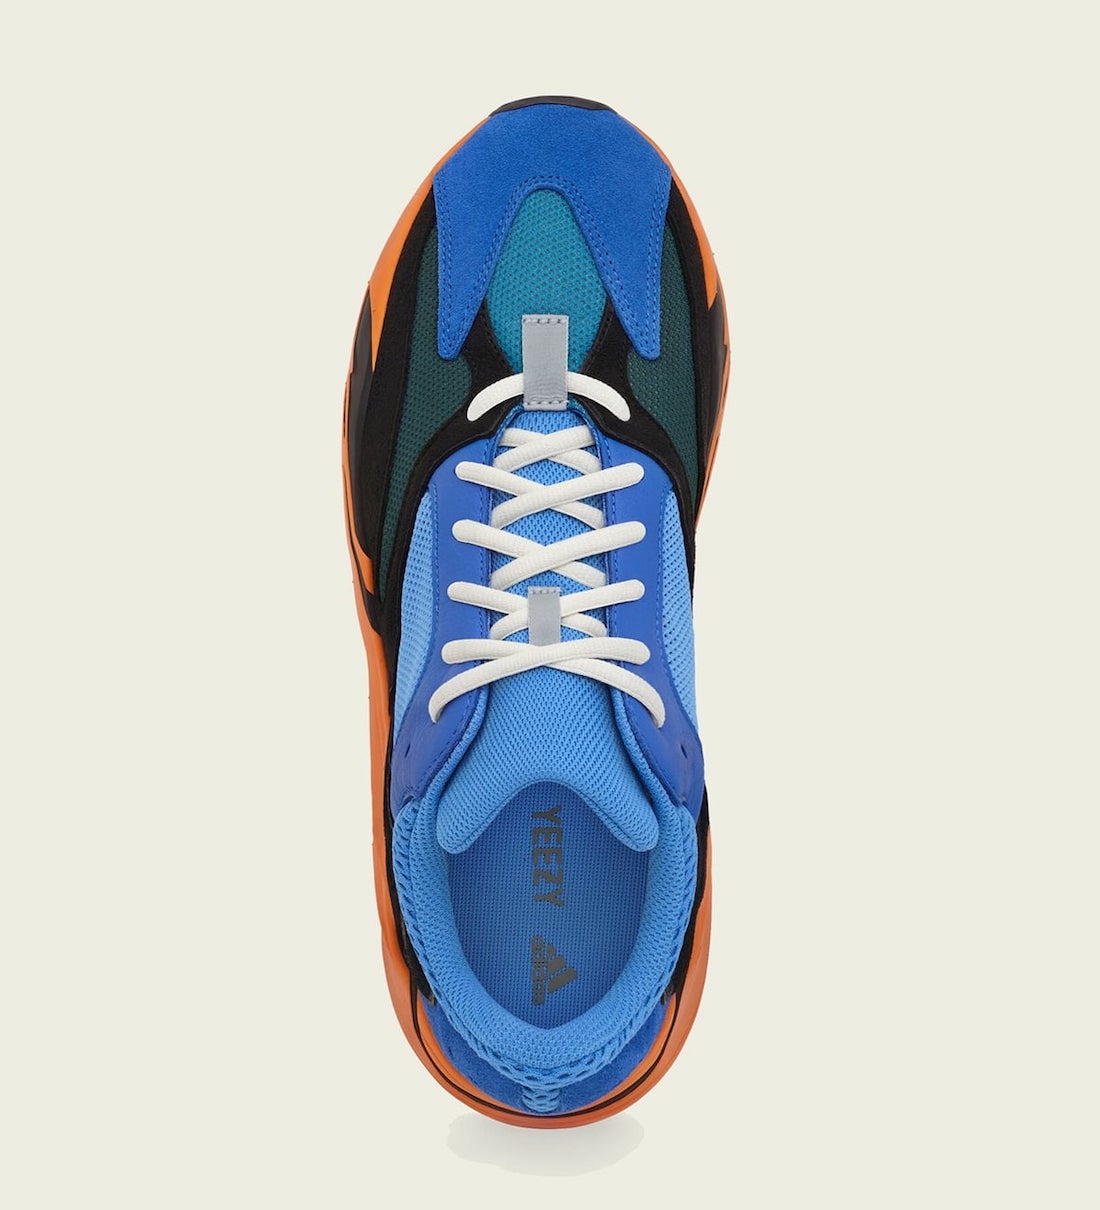 adidas-Yeezy-Boost-700-Bright-Blue-GZ0541-Release-Date-2